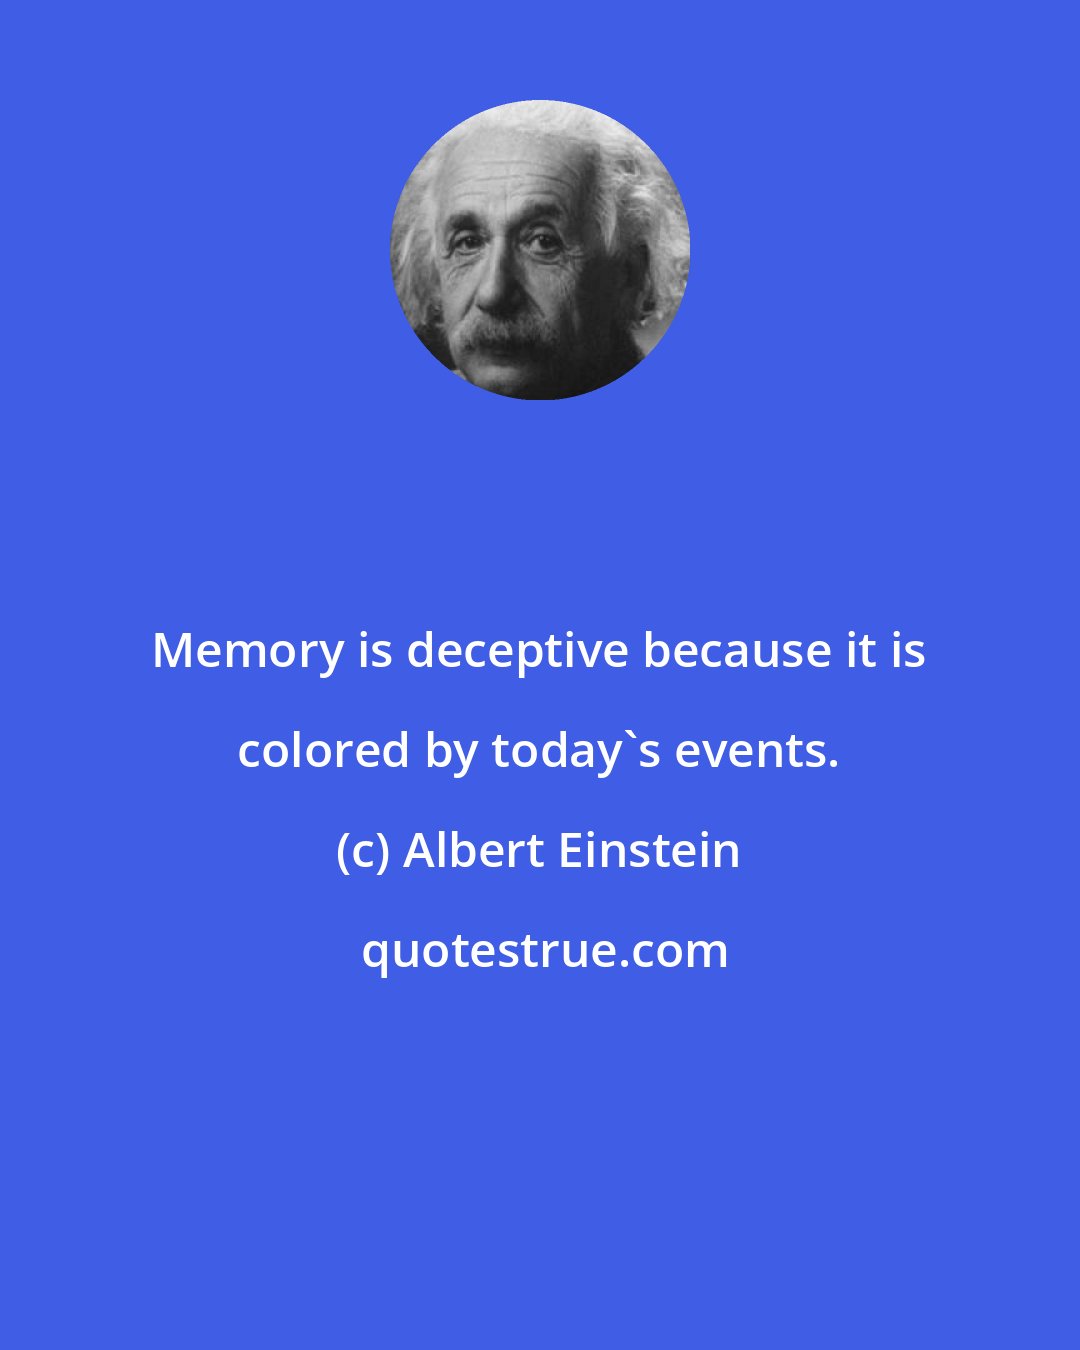 Albert Einstein: Memory is deceptive because it is colored by today's events.